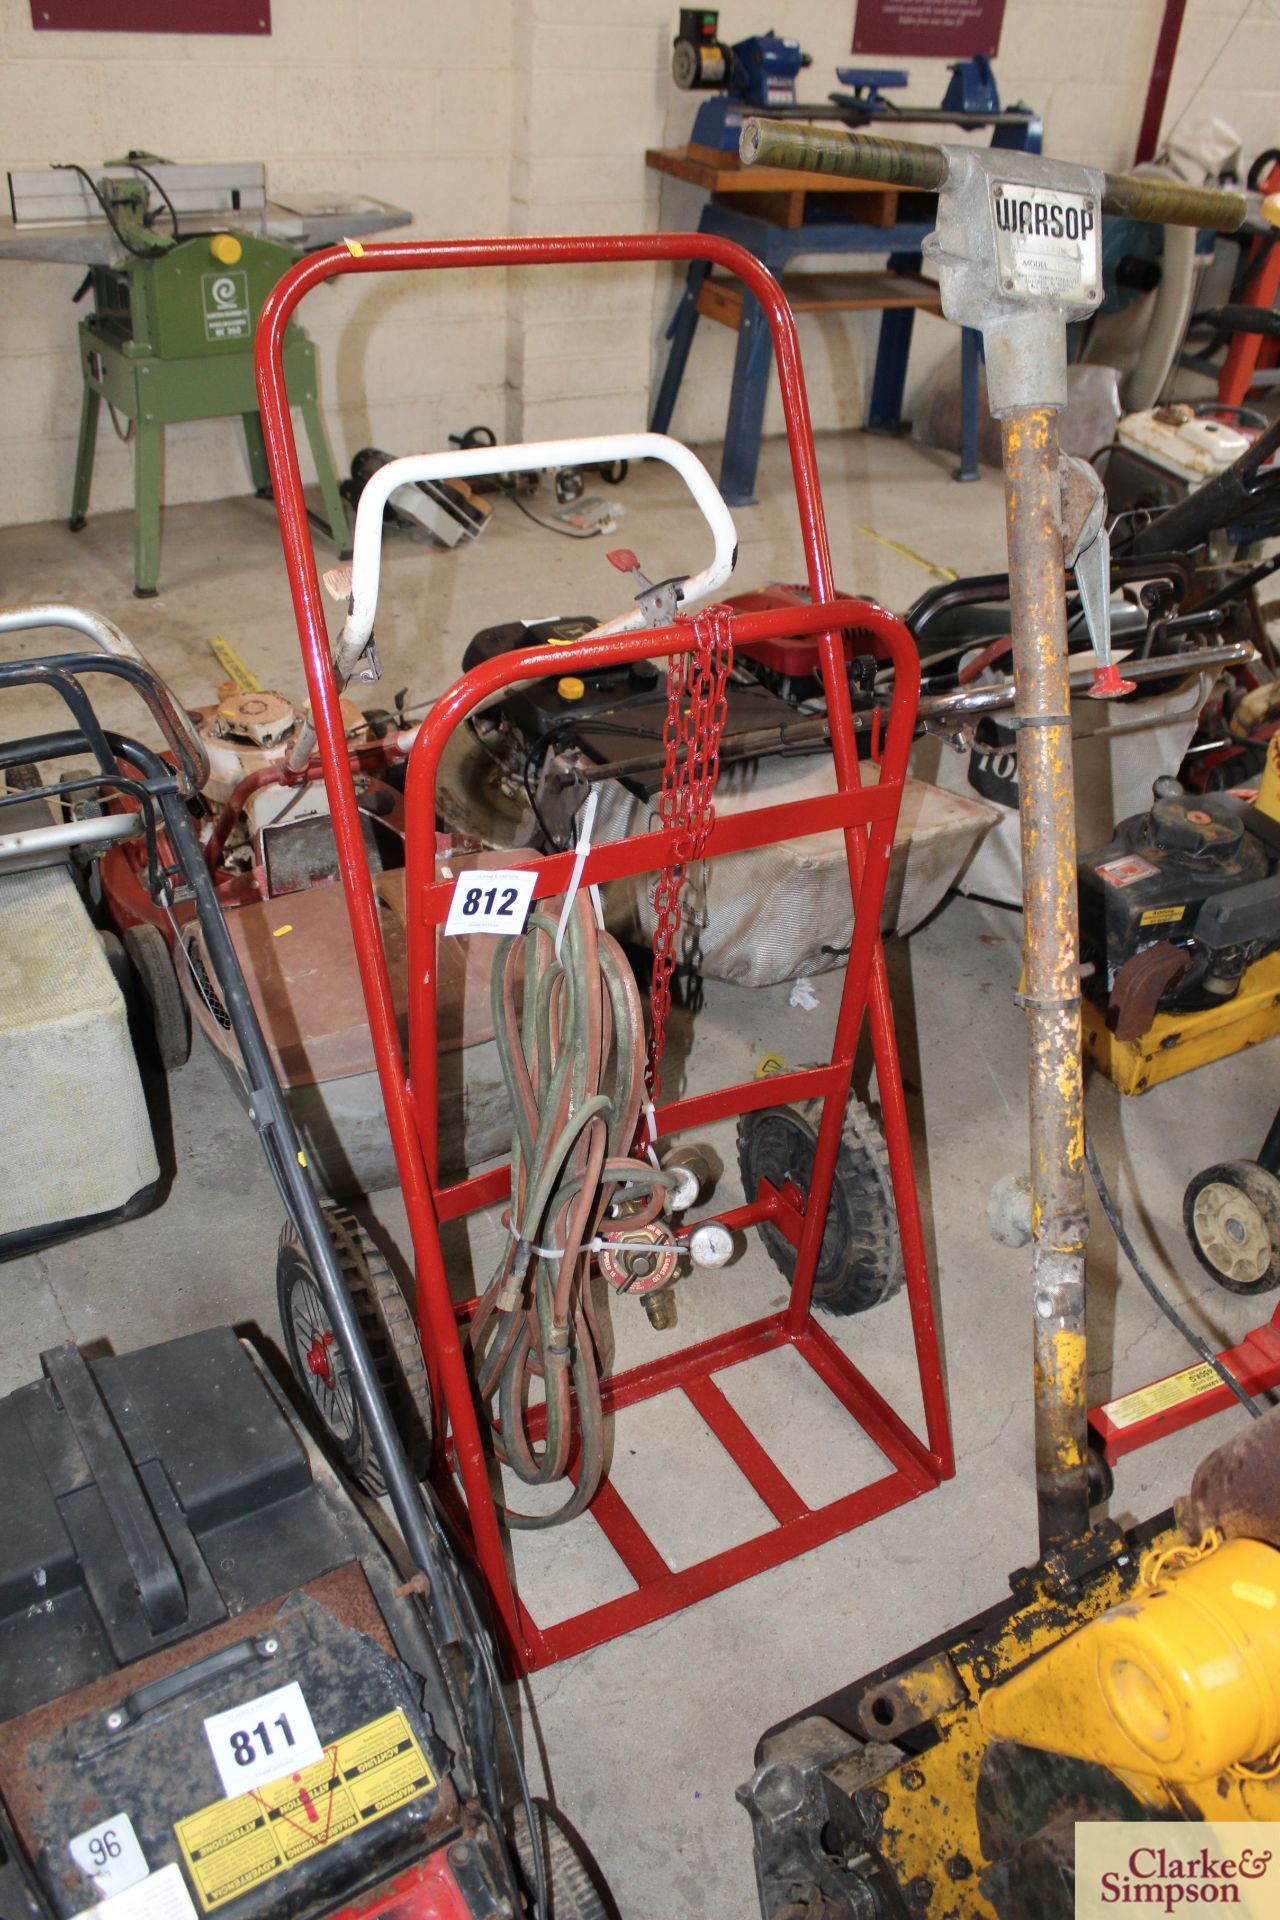 Welding trolley with hoses and gauges.